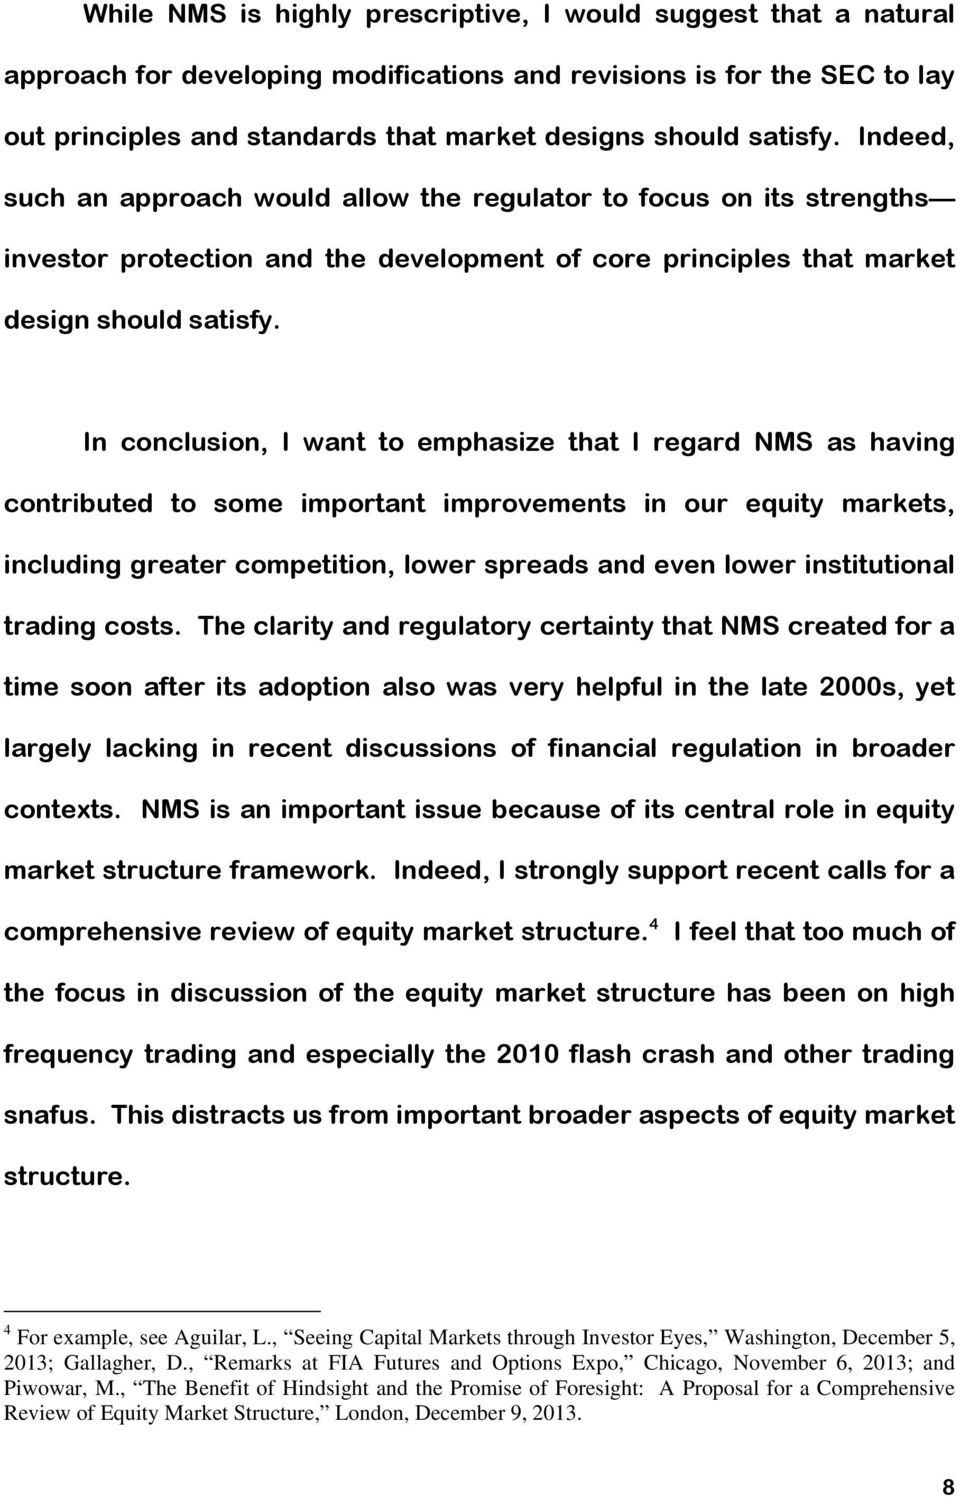 In conclusion, I want to emphasize that I regard NMS as having contributed to some important improvements in our equity markets, including greater competition, lower spreads and even lower